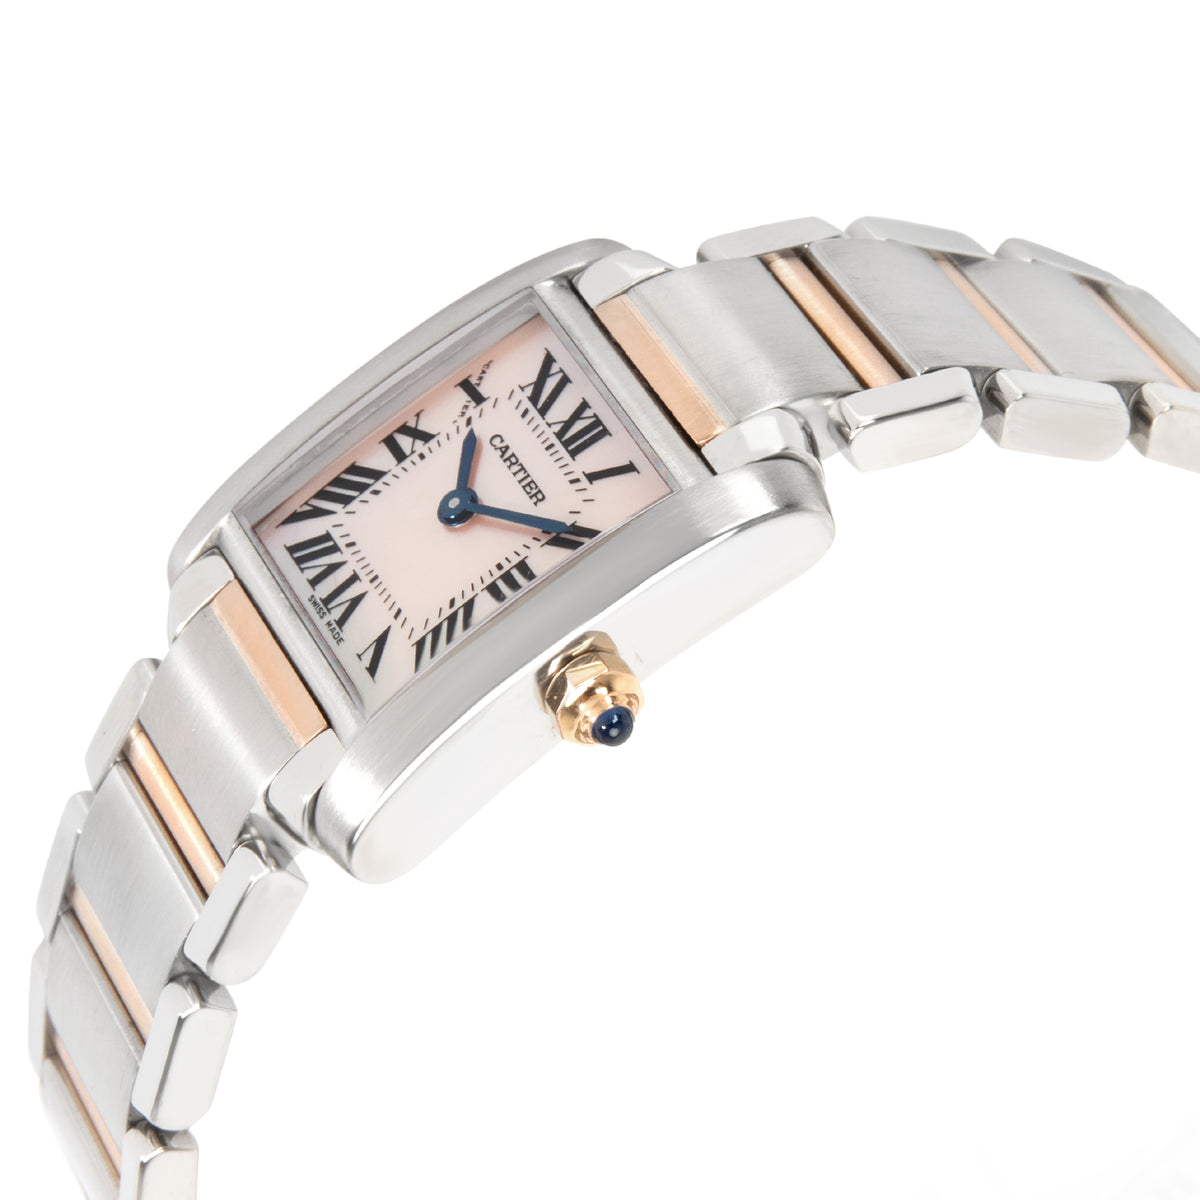 Cartier Tank Francaise W51027Q4 Women's Watch in 18kt Stainless Steel/Rose Gold